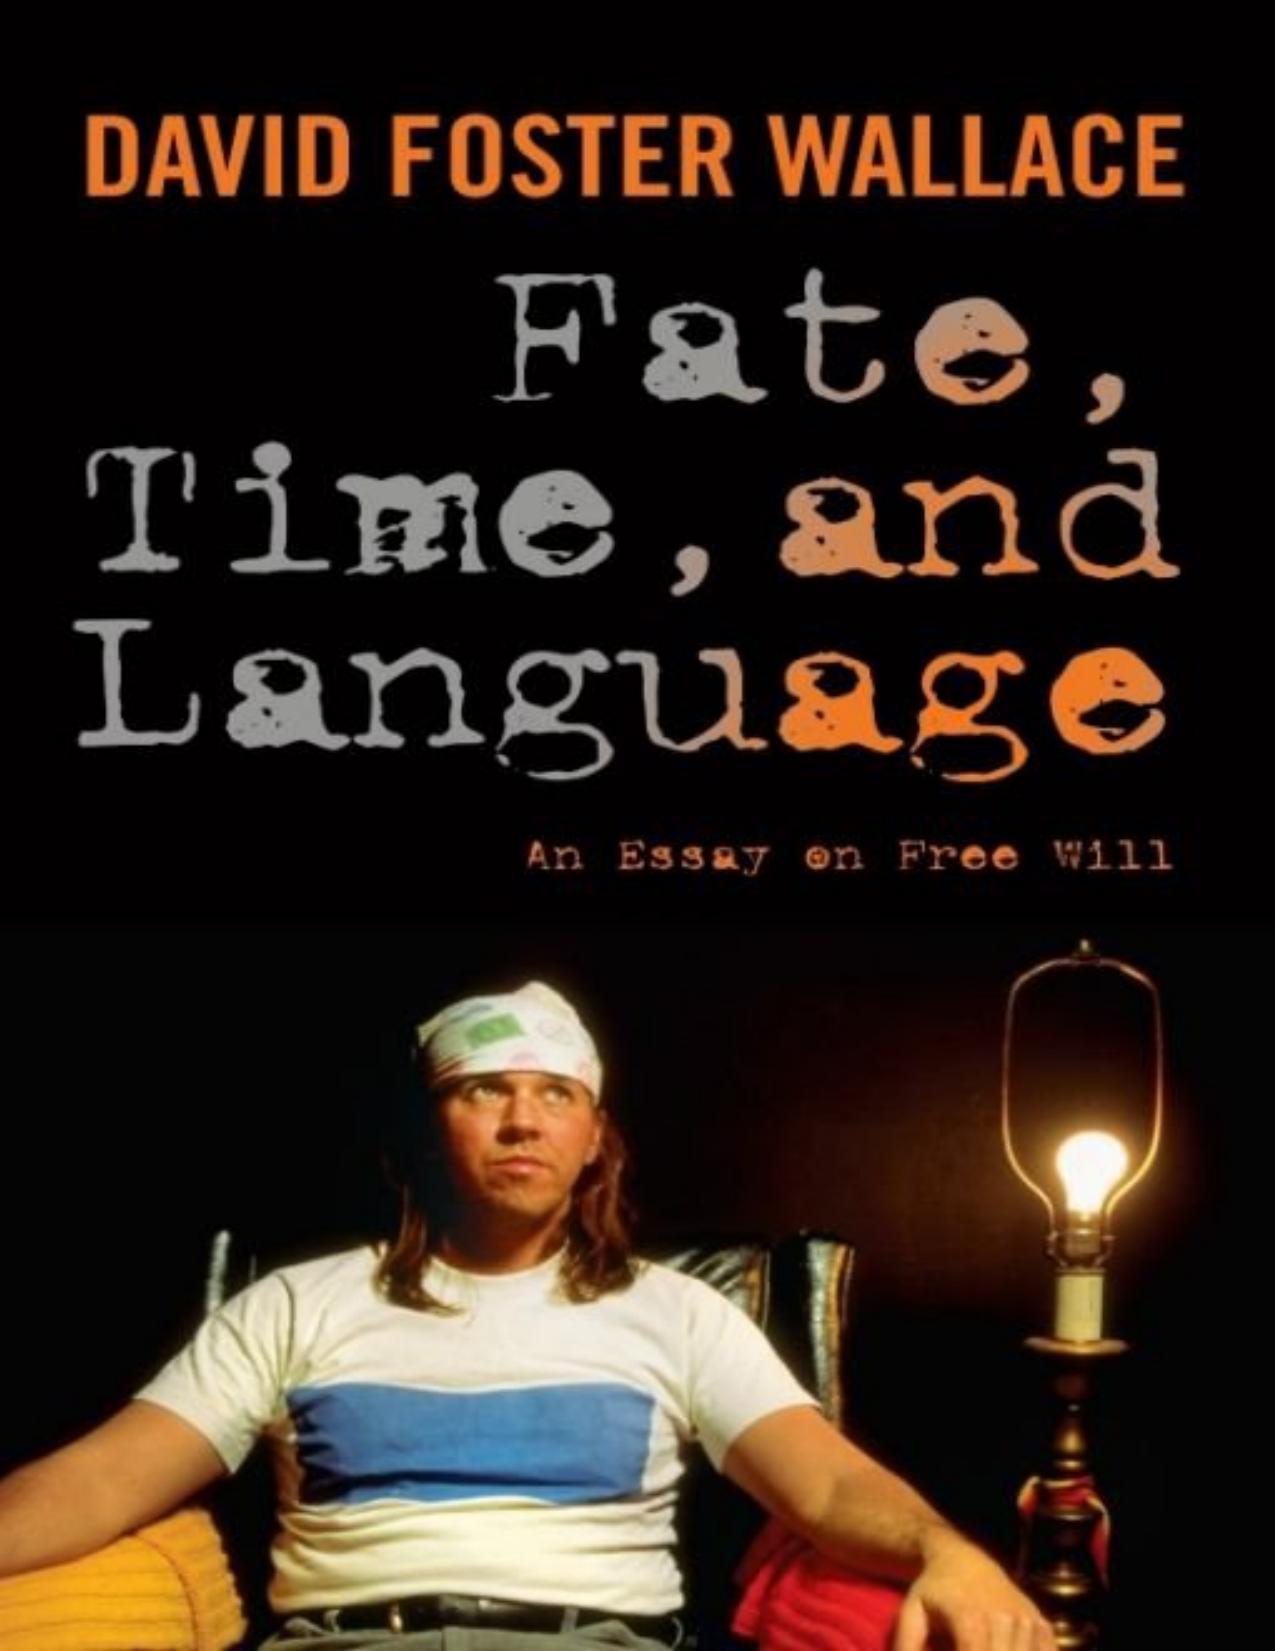 Fate, Time, and Language by David Foster Wallace